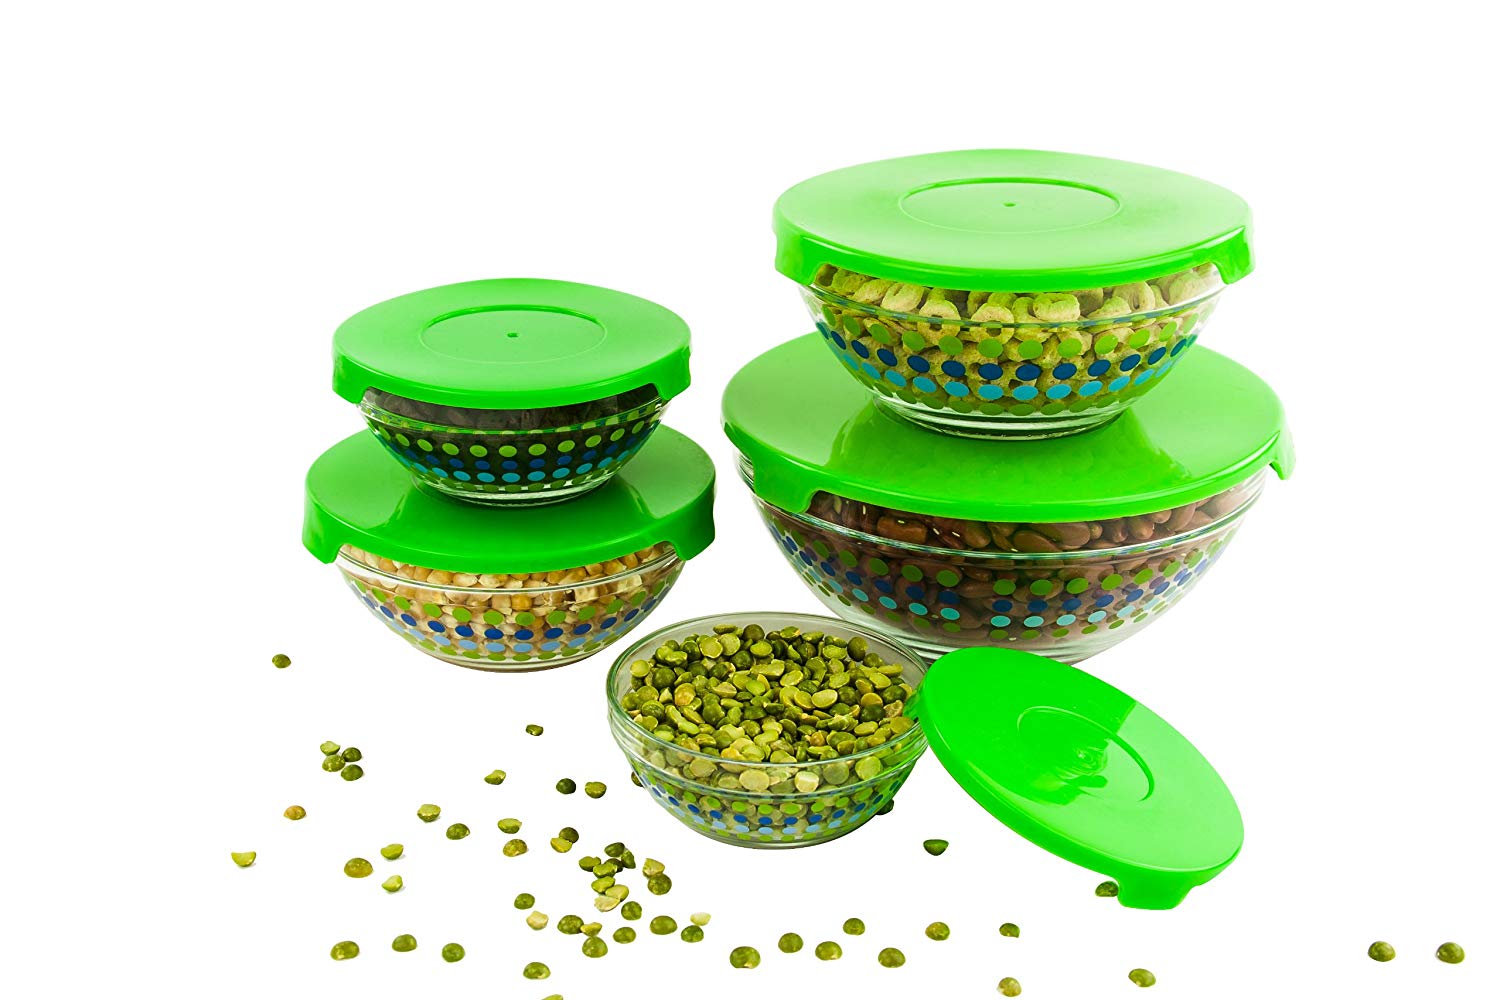 All Purpose Glass Bowls and Food Storage Containers 10 Pcs Set - Glass Lunch Bowls Set with Snap Tight Green Lids (MultiColor Polka Dots)